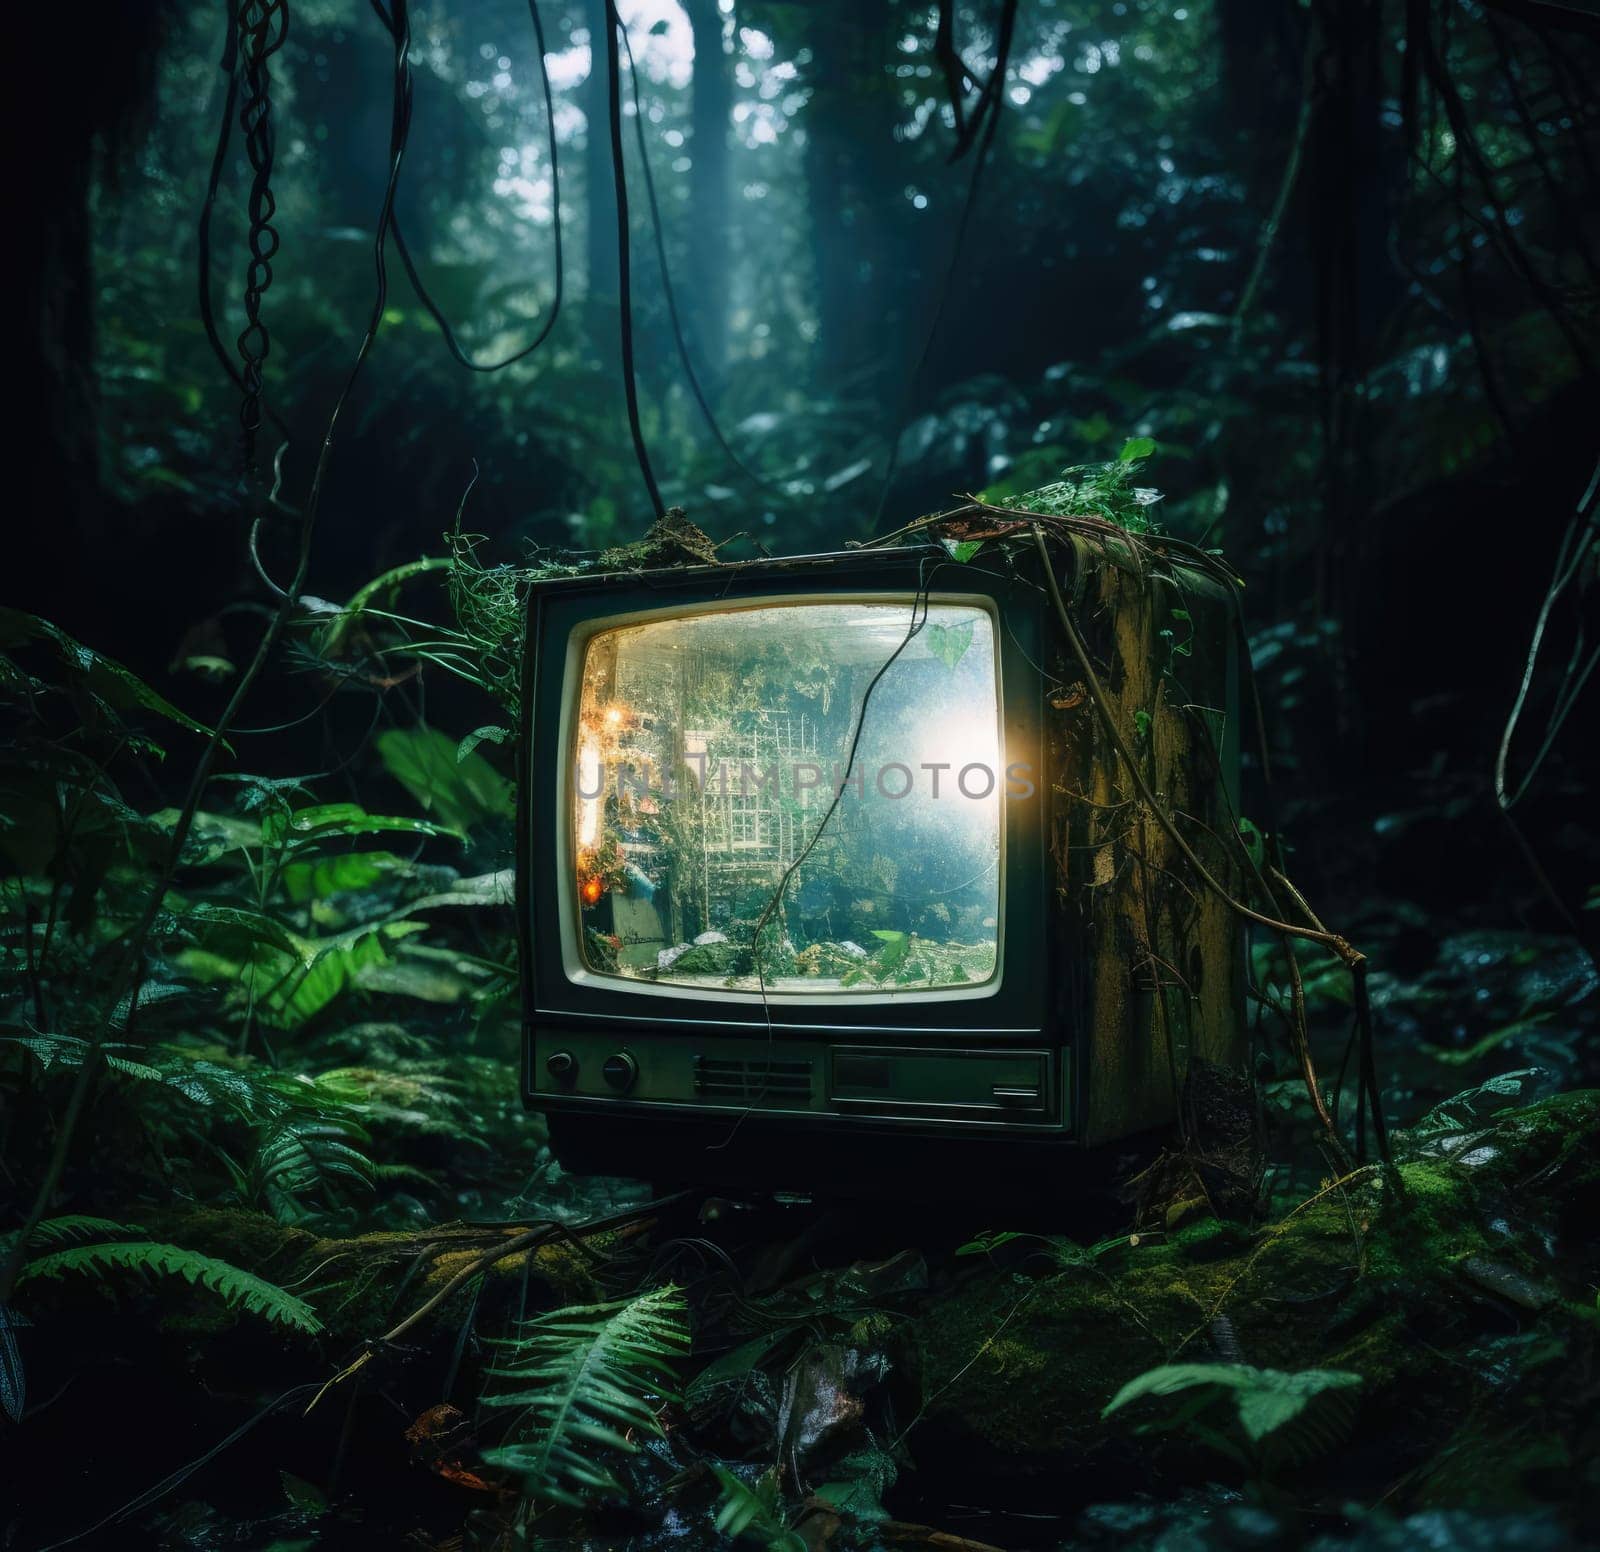 An old TV turned on in the green jungle